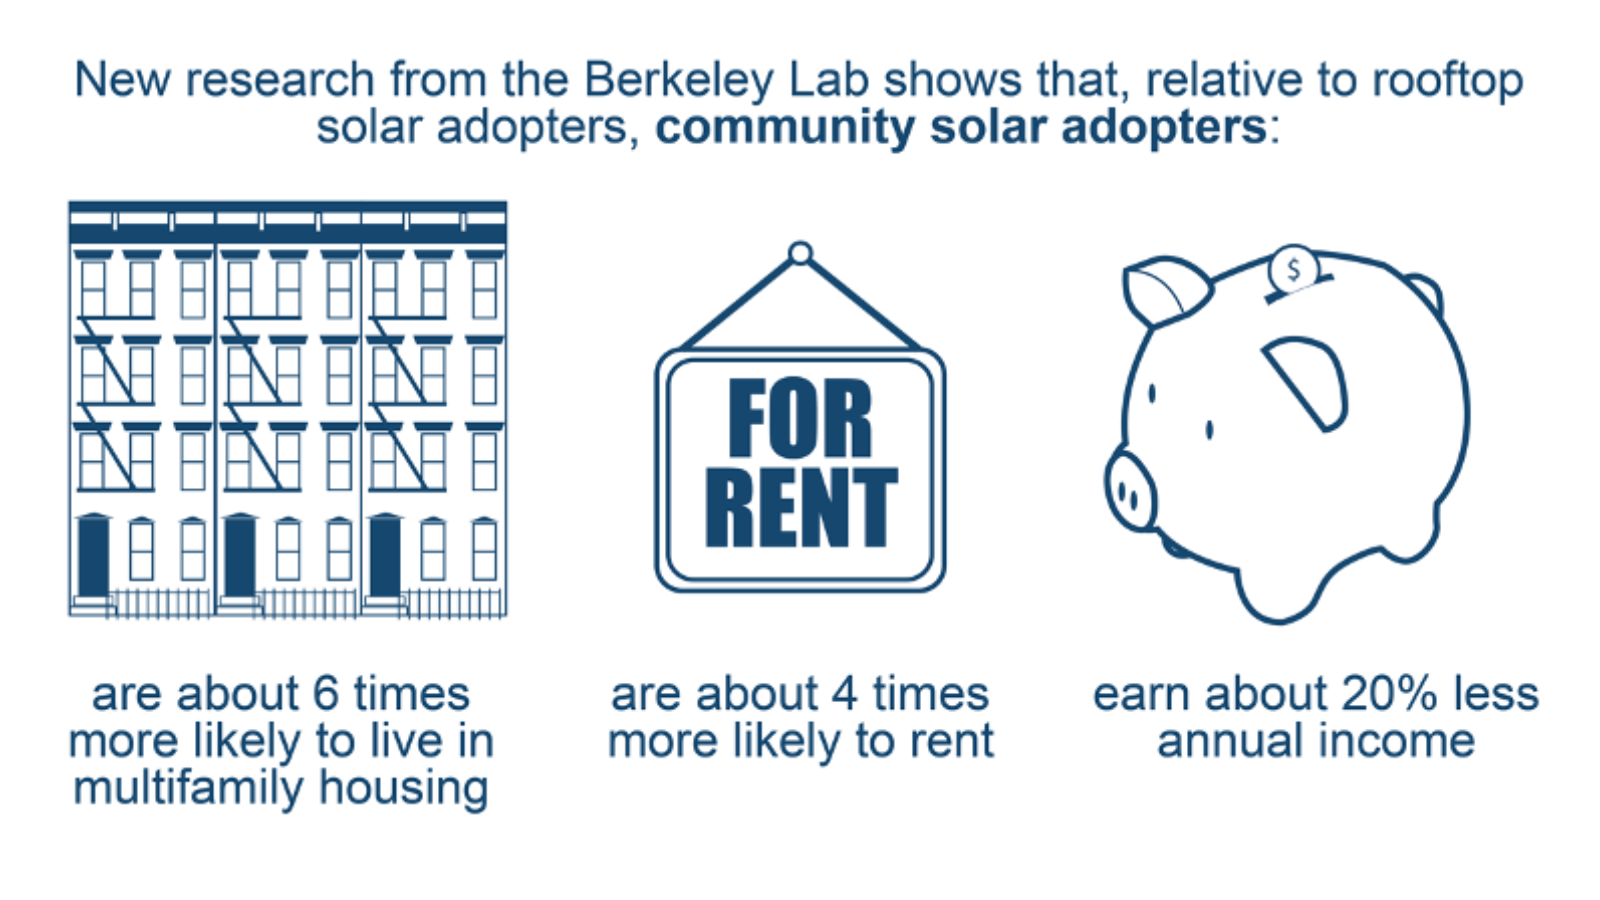 Study by Berkeley Lab and NREL finds that community solar expands access to solar adoption